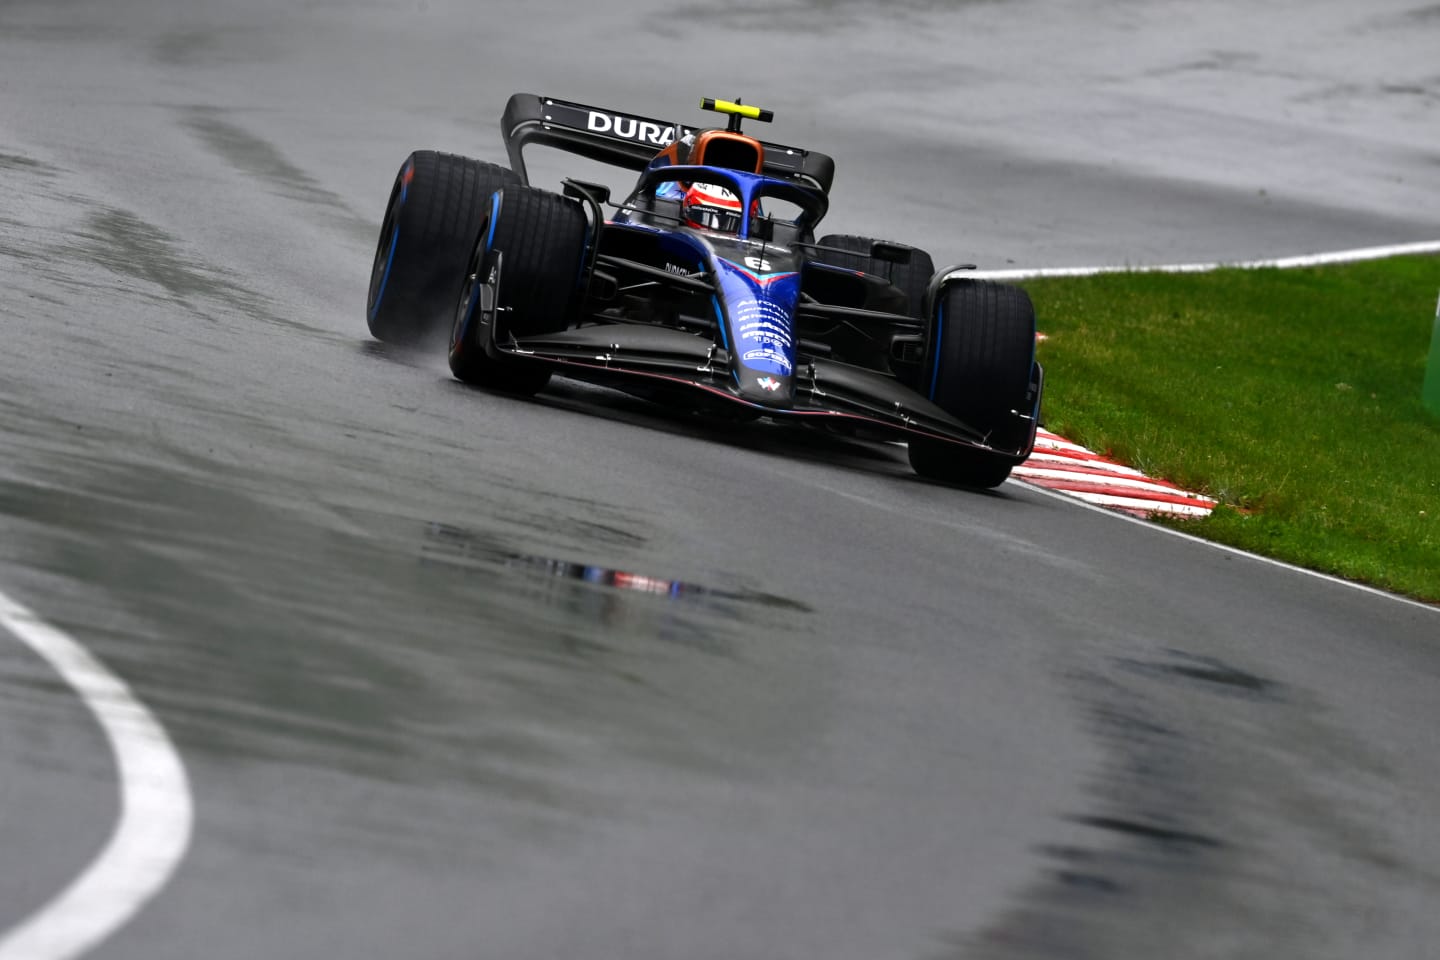 MONTREAL, QUEBEC - JUNE 18: Nicholas Latifi of Canada driving the (6) Williams FW44 Mercedes in the wet during final practice ahead of the F1 Grand Prix of Canada at Circuit Gilles Villeneuve on June 18, 2022 in Montreal, Quebec. (Photo by Dan Mullan/Getty Images)